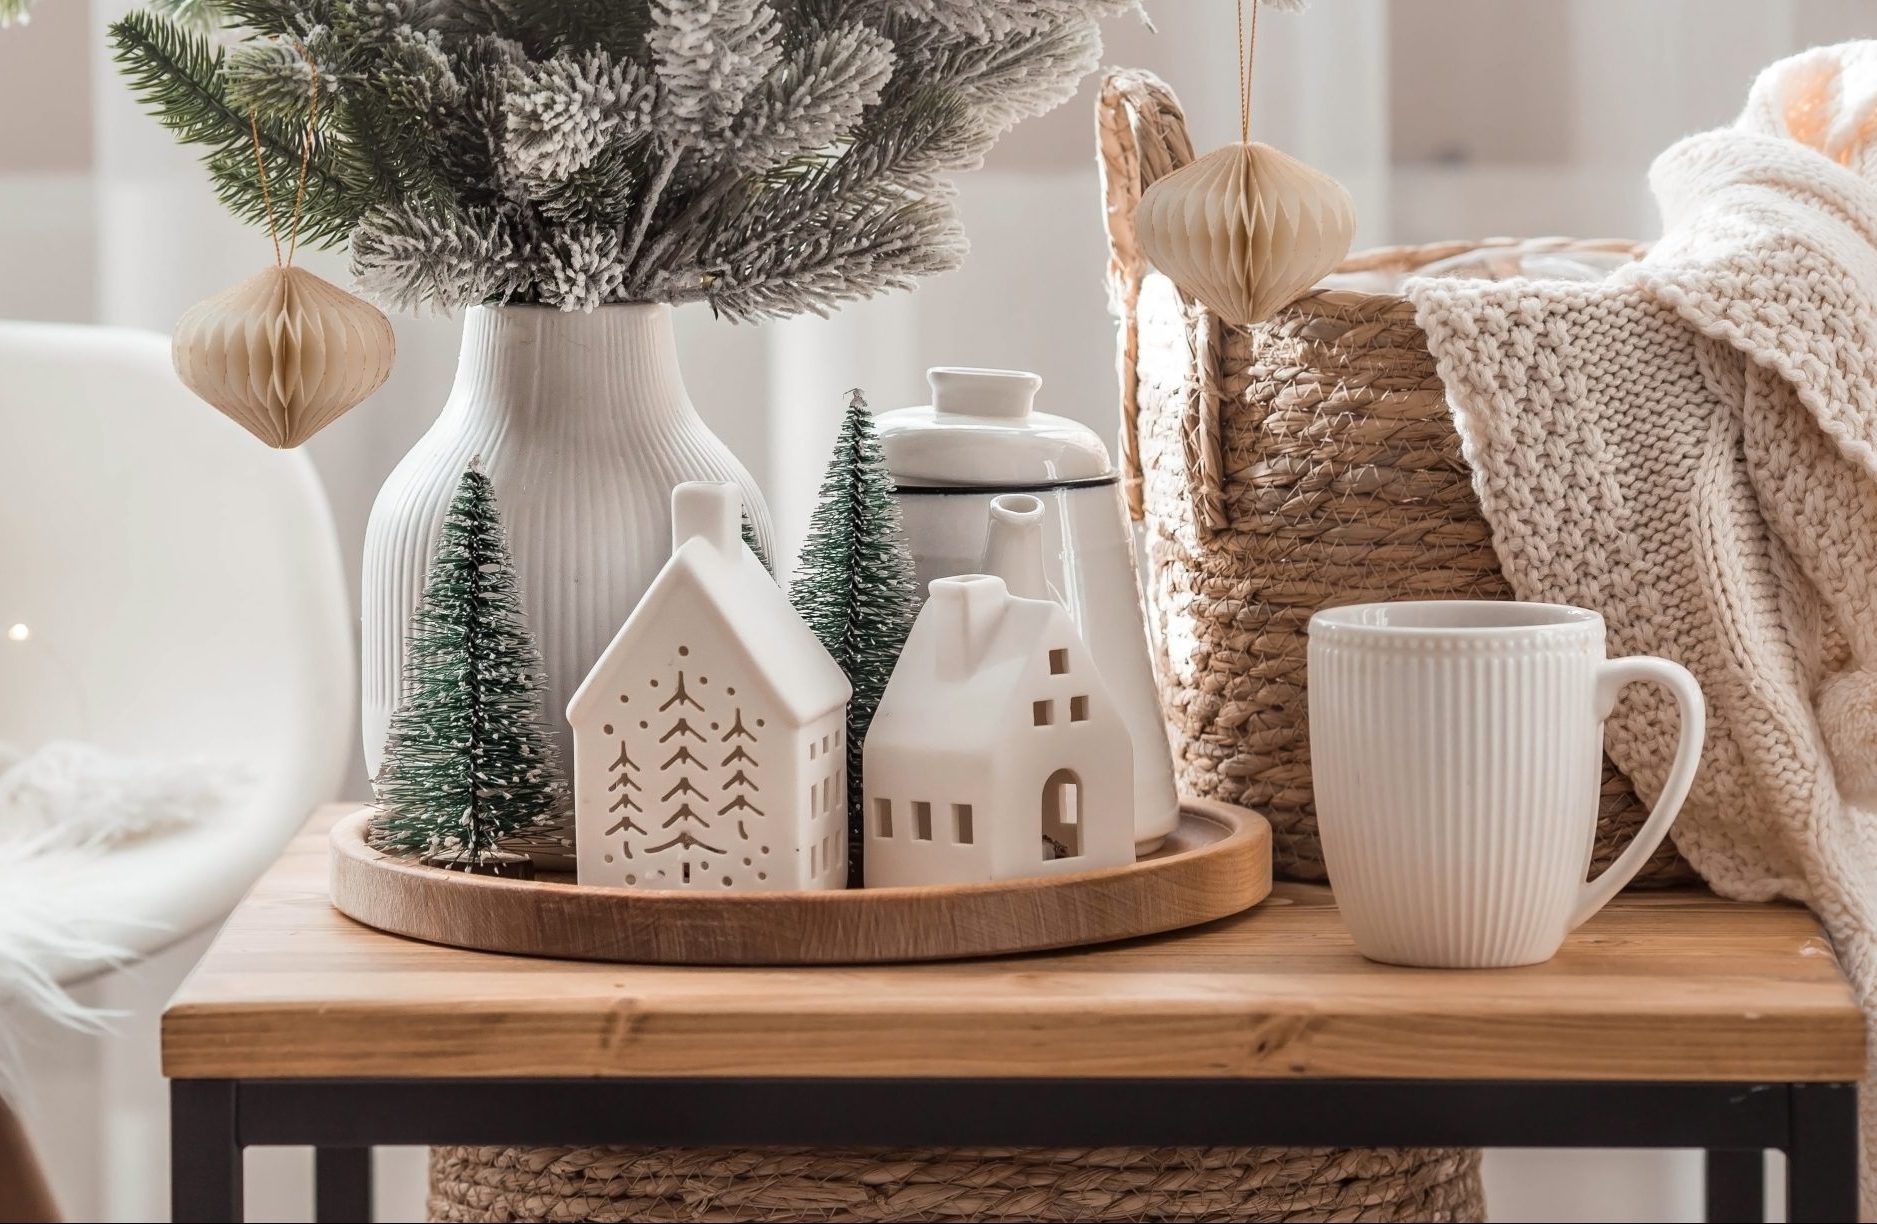 winter home decor ideas; holiday decor on a wood table near a basket with blankets